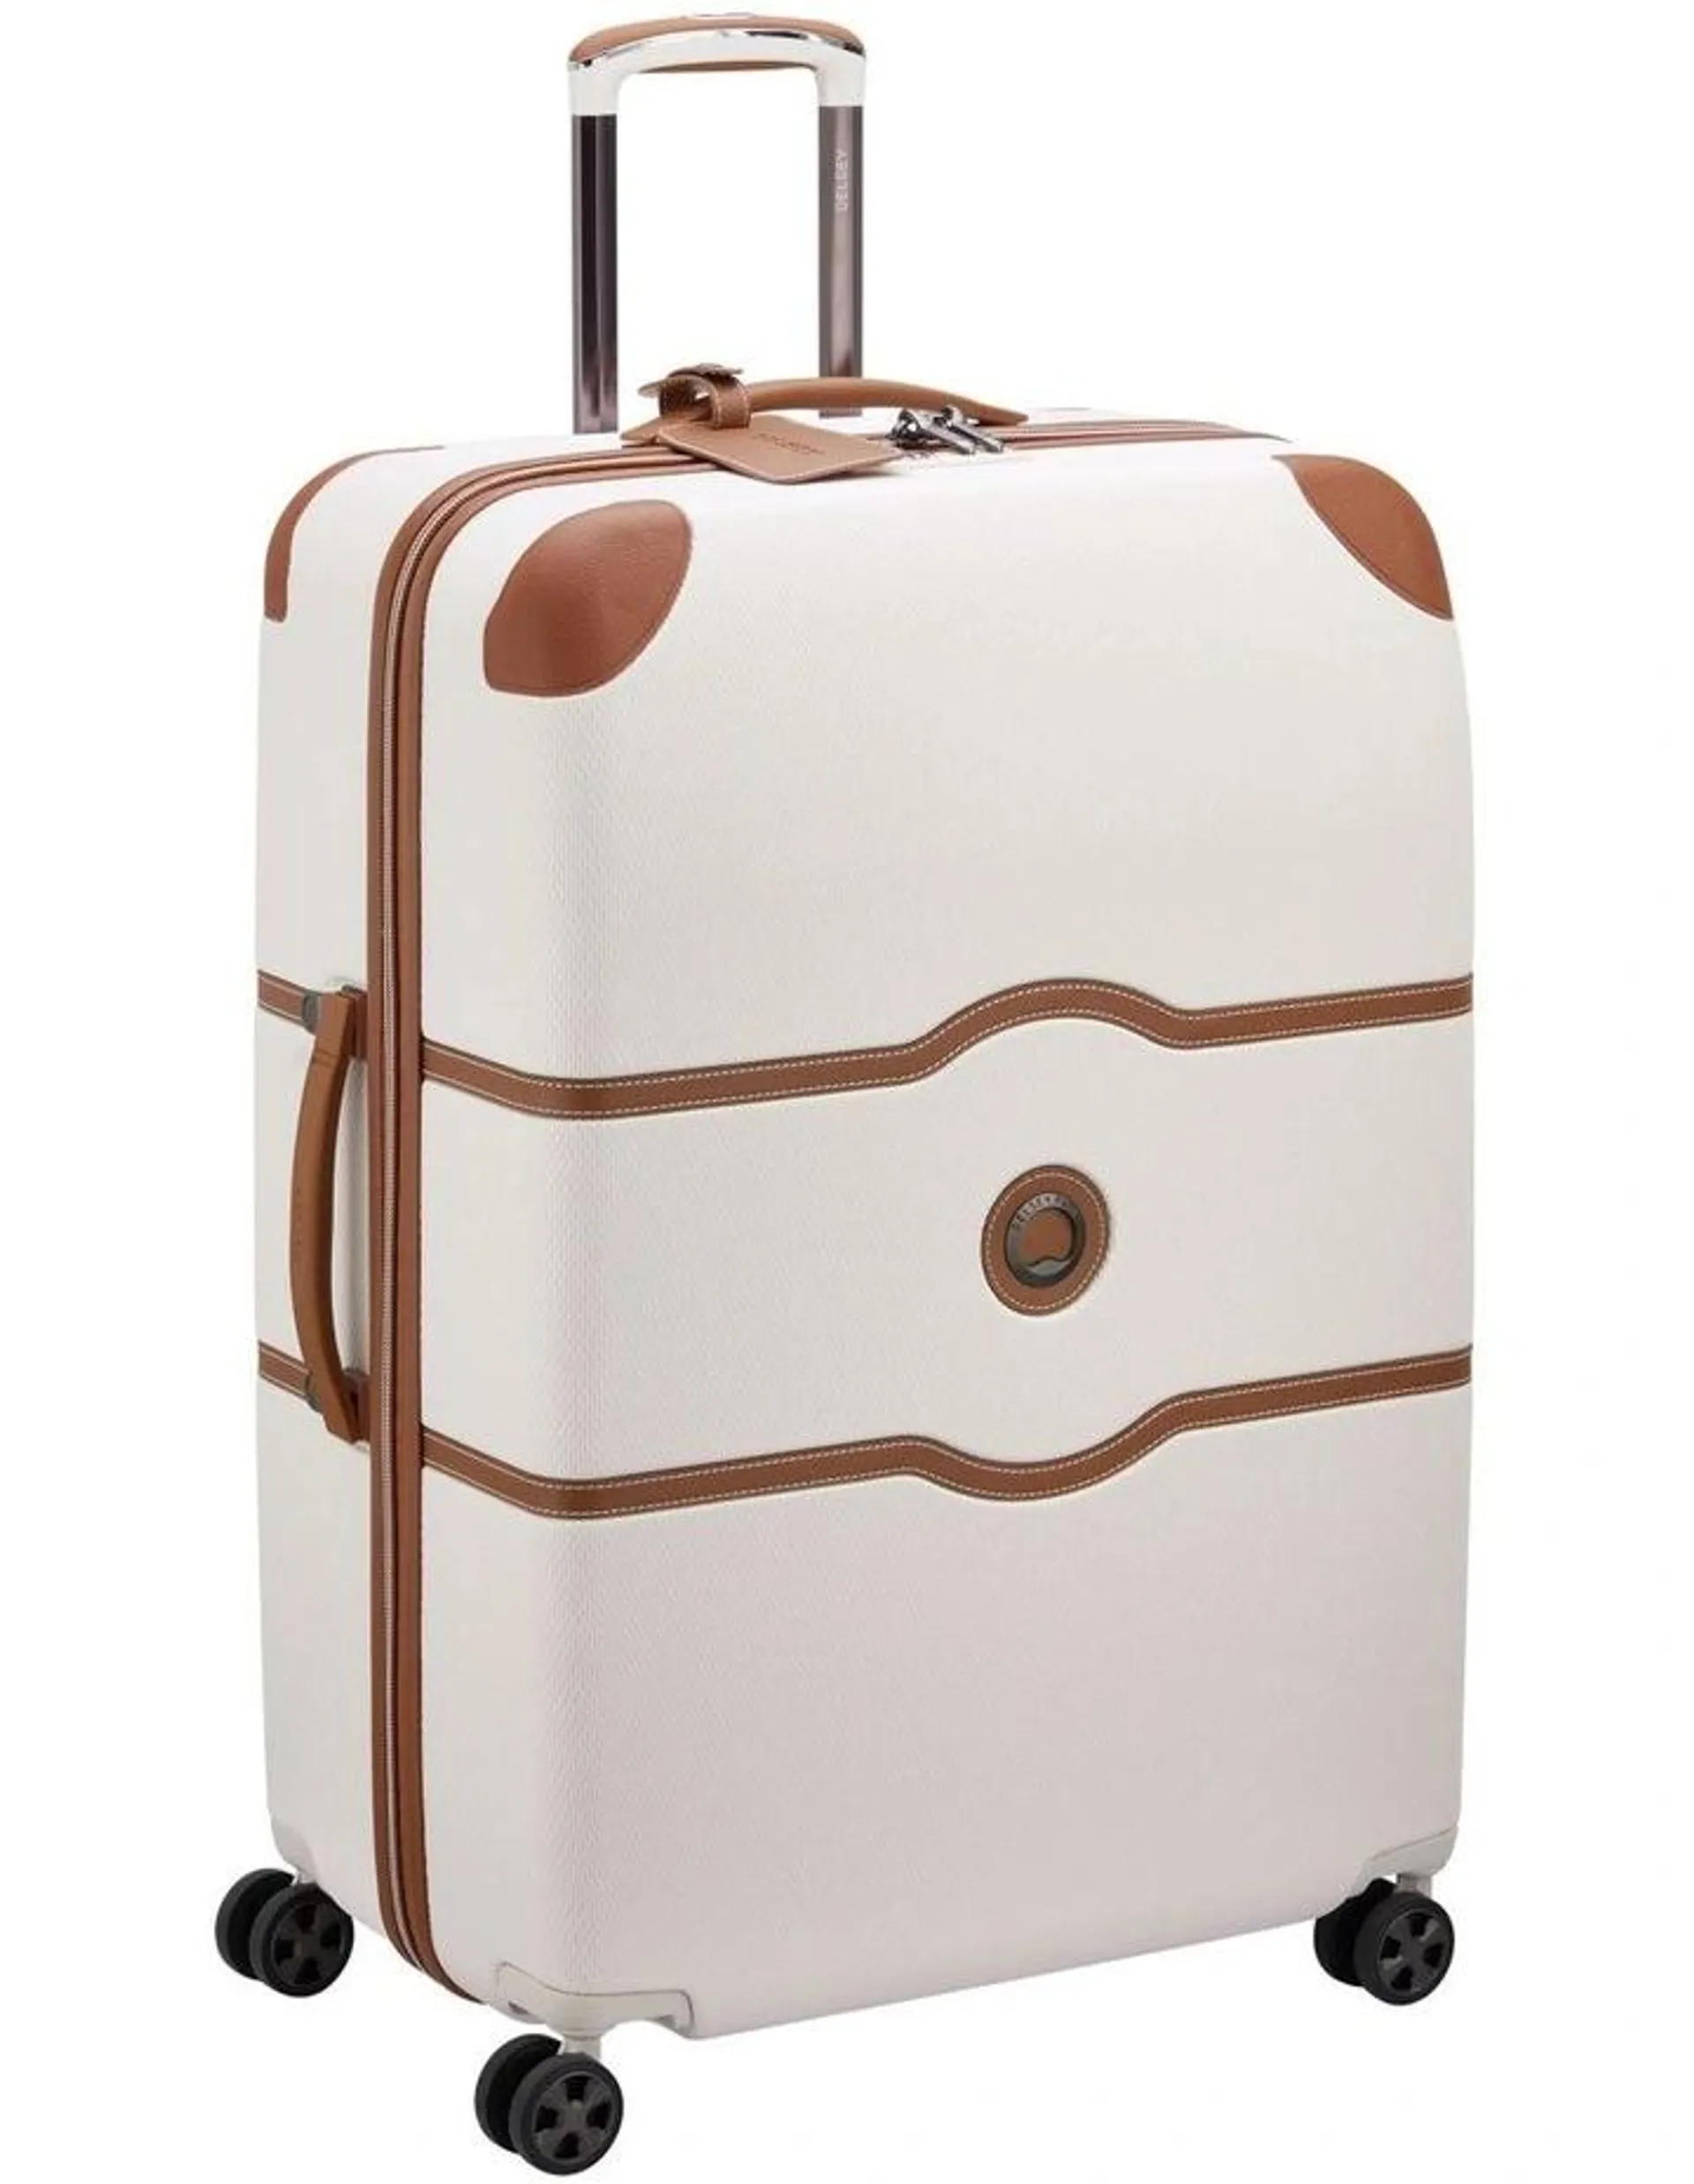 Chatelet Air 2.0 76cm 4DW Trolley Suitcase In Angora